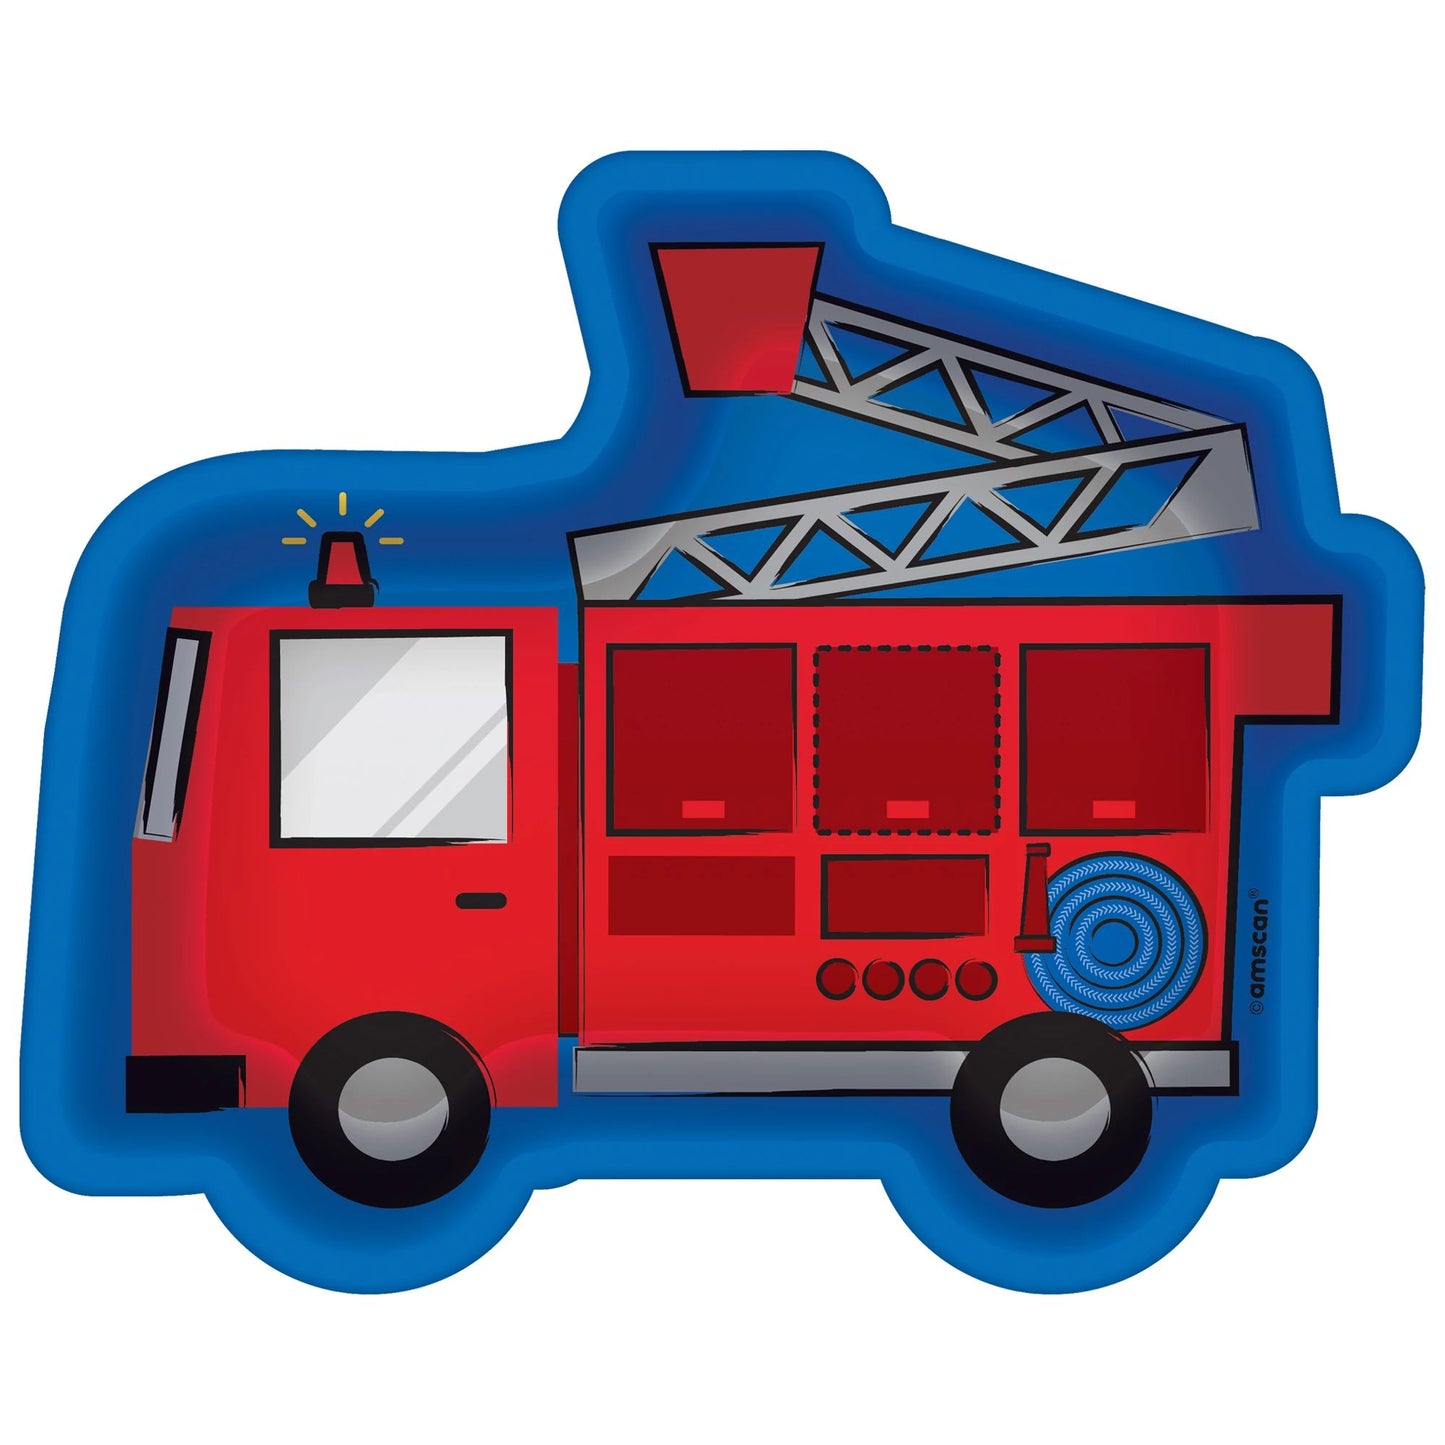 blue paper plate in the shape of a fire truck with fire truck illustration